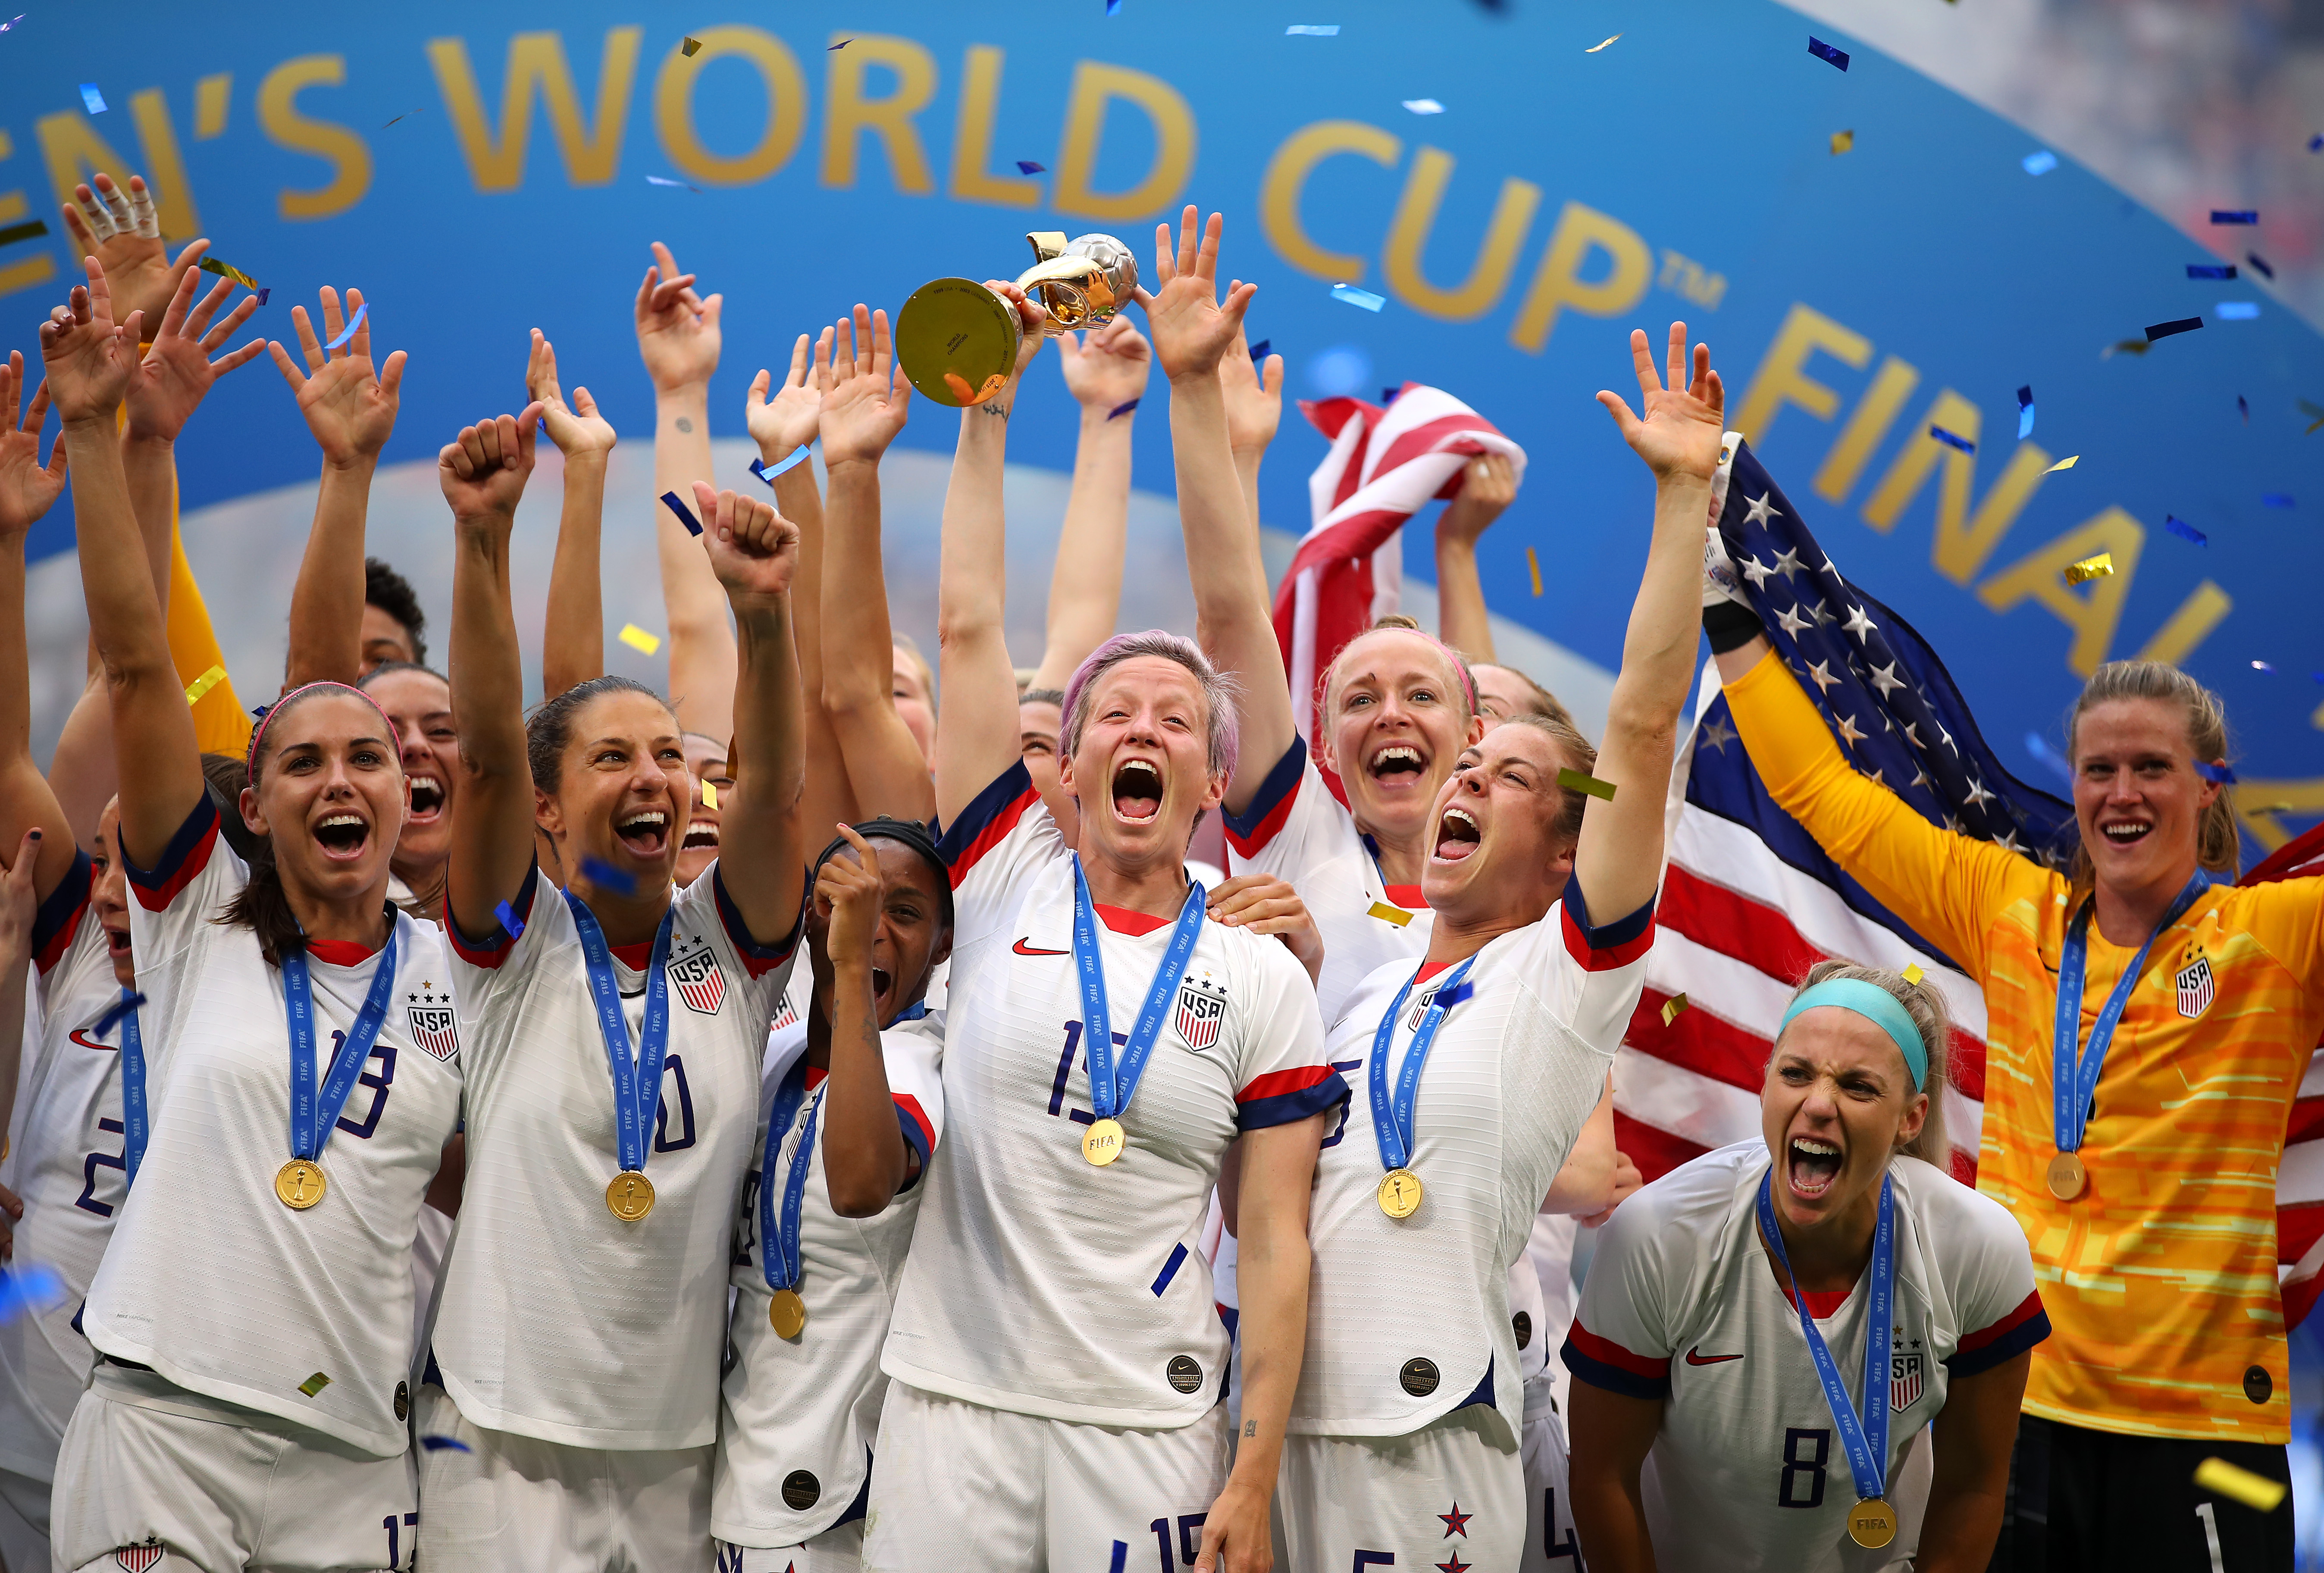 Us womens soccer team vows to appeal judges dismissal of equal pay lawsuit